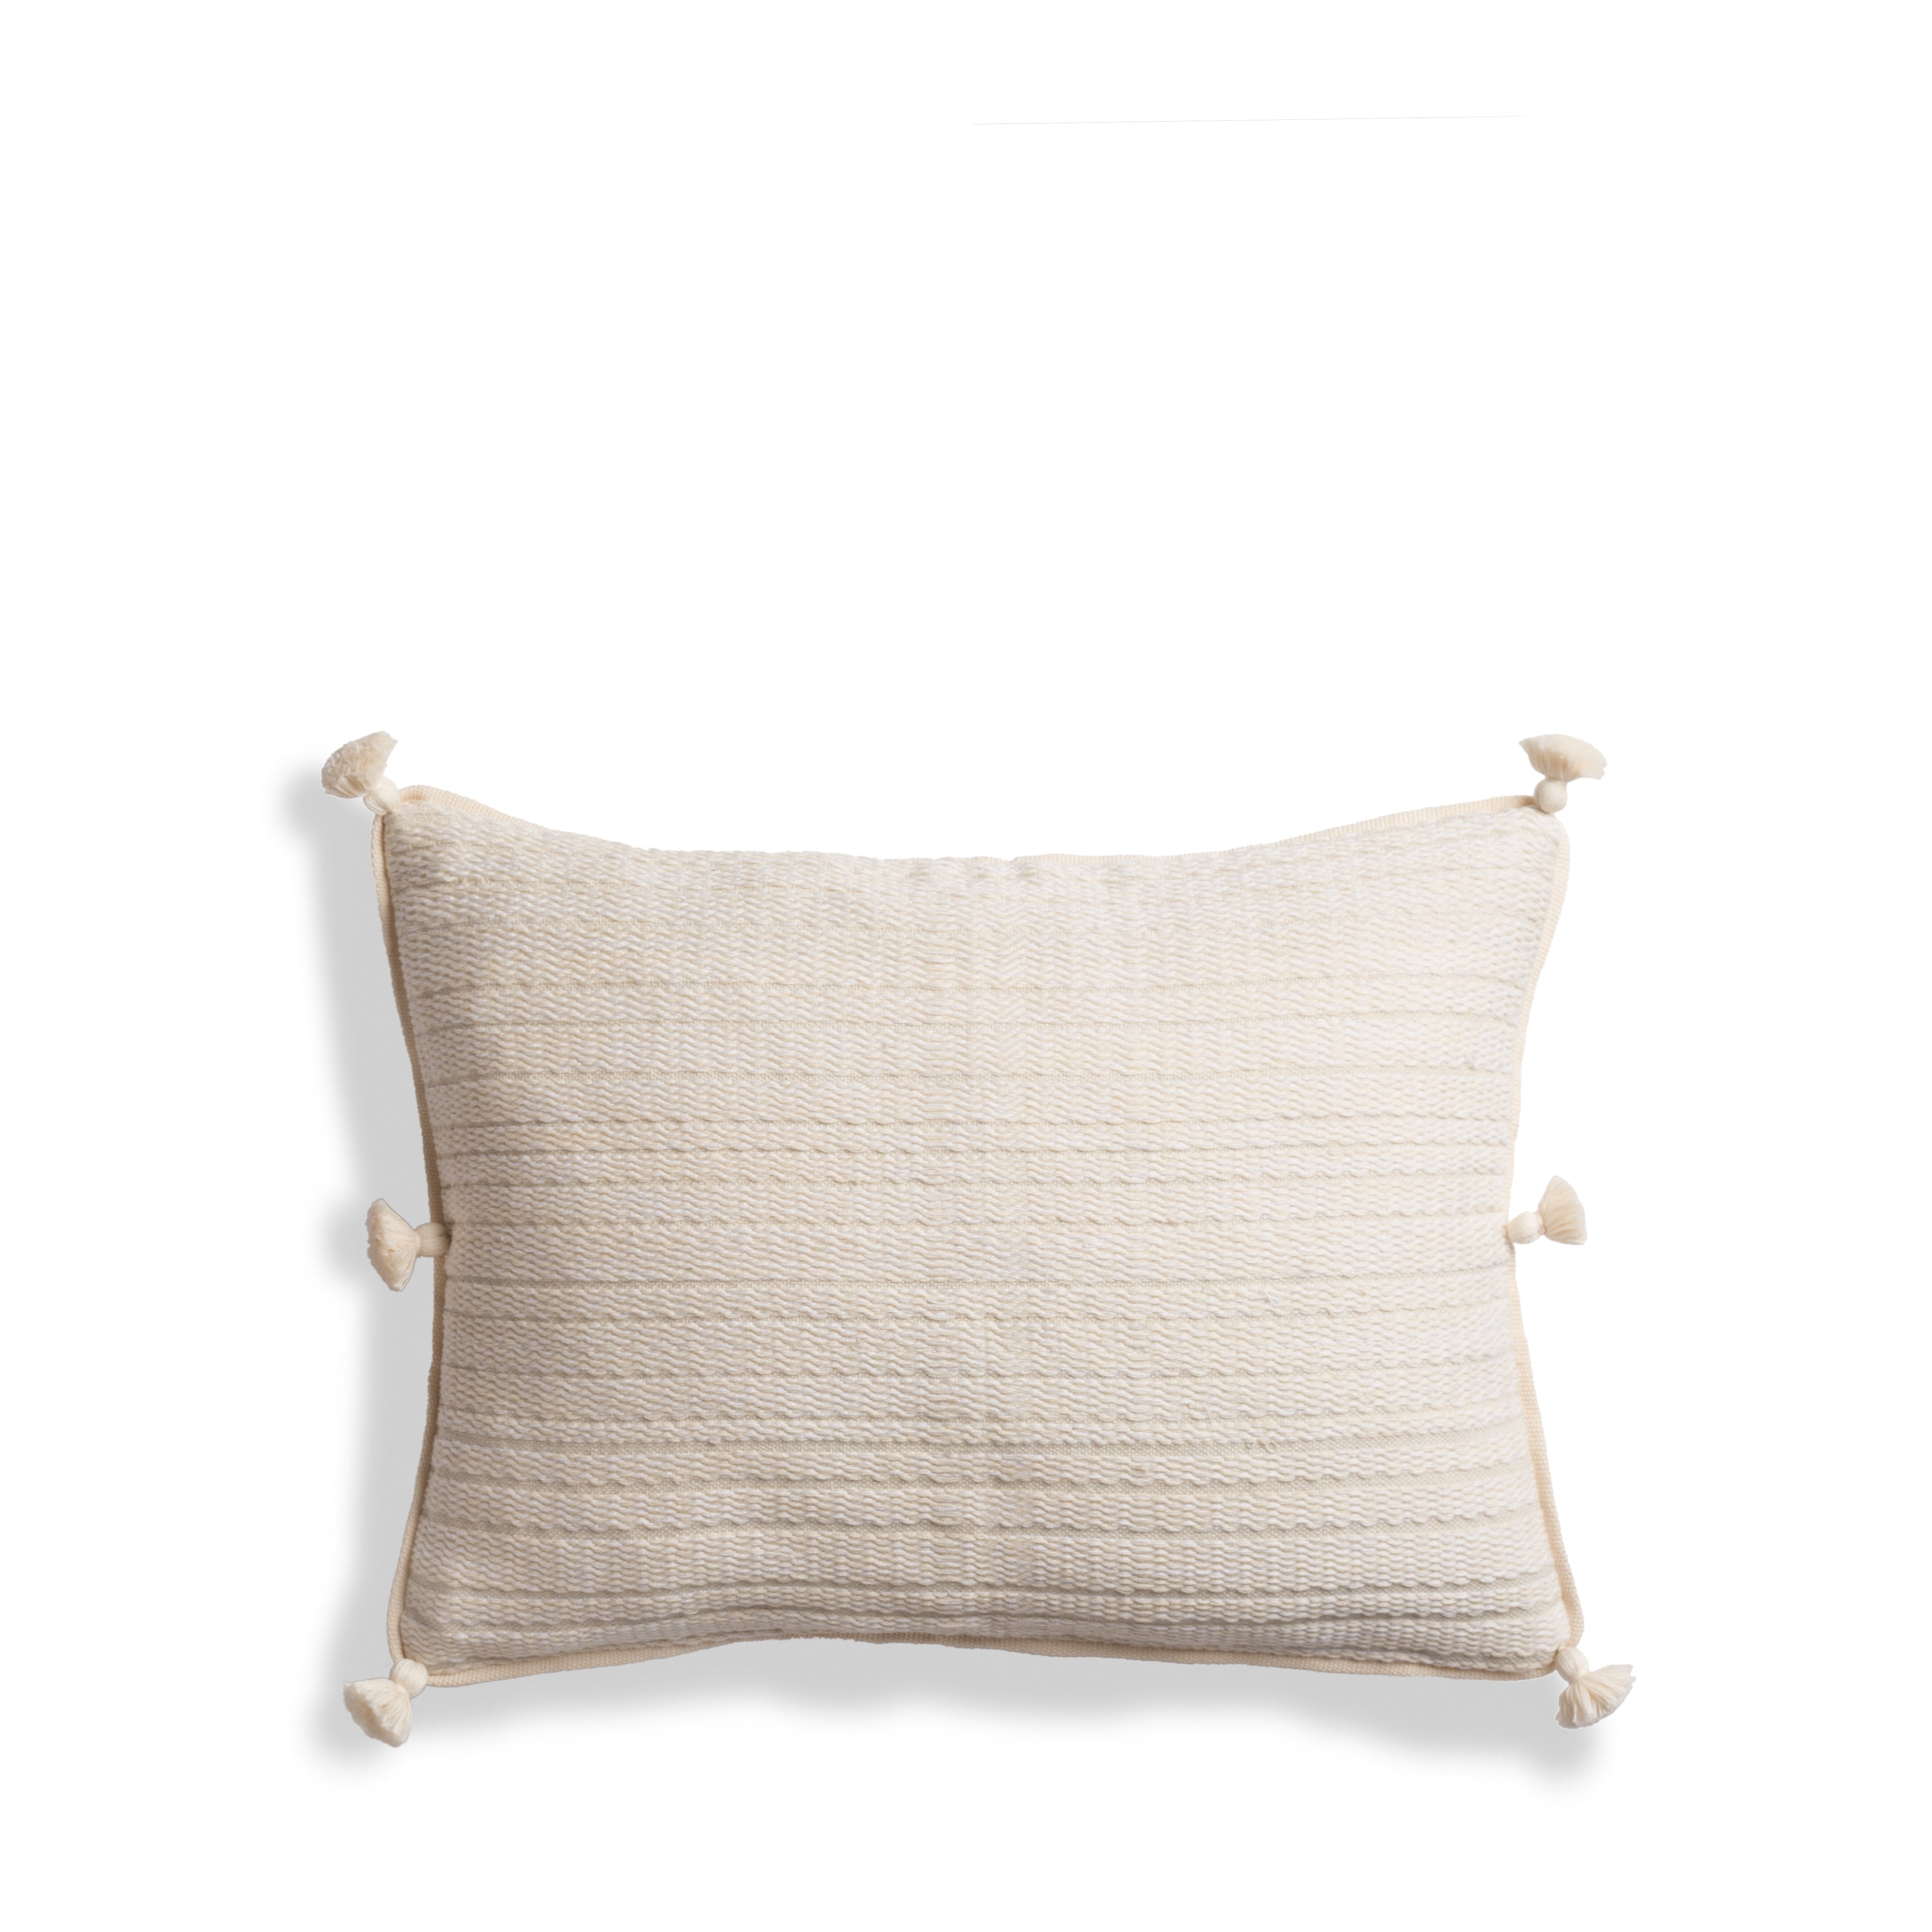 Hand woven Small Lumbar Accent - Ethical Shopping at Mercado Global